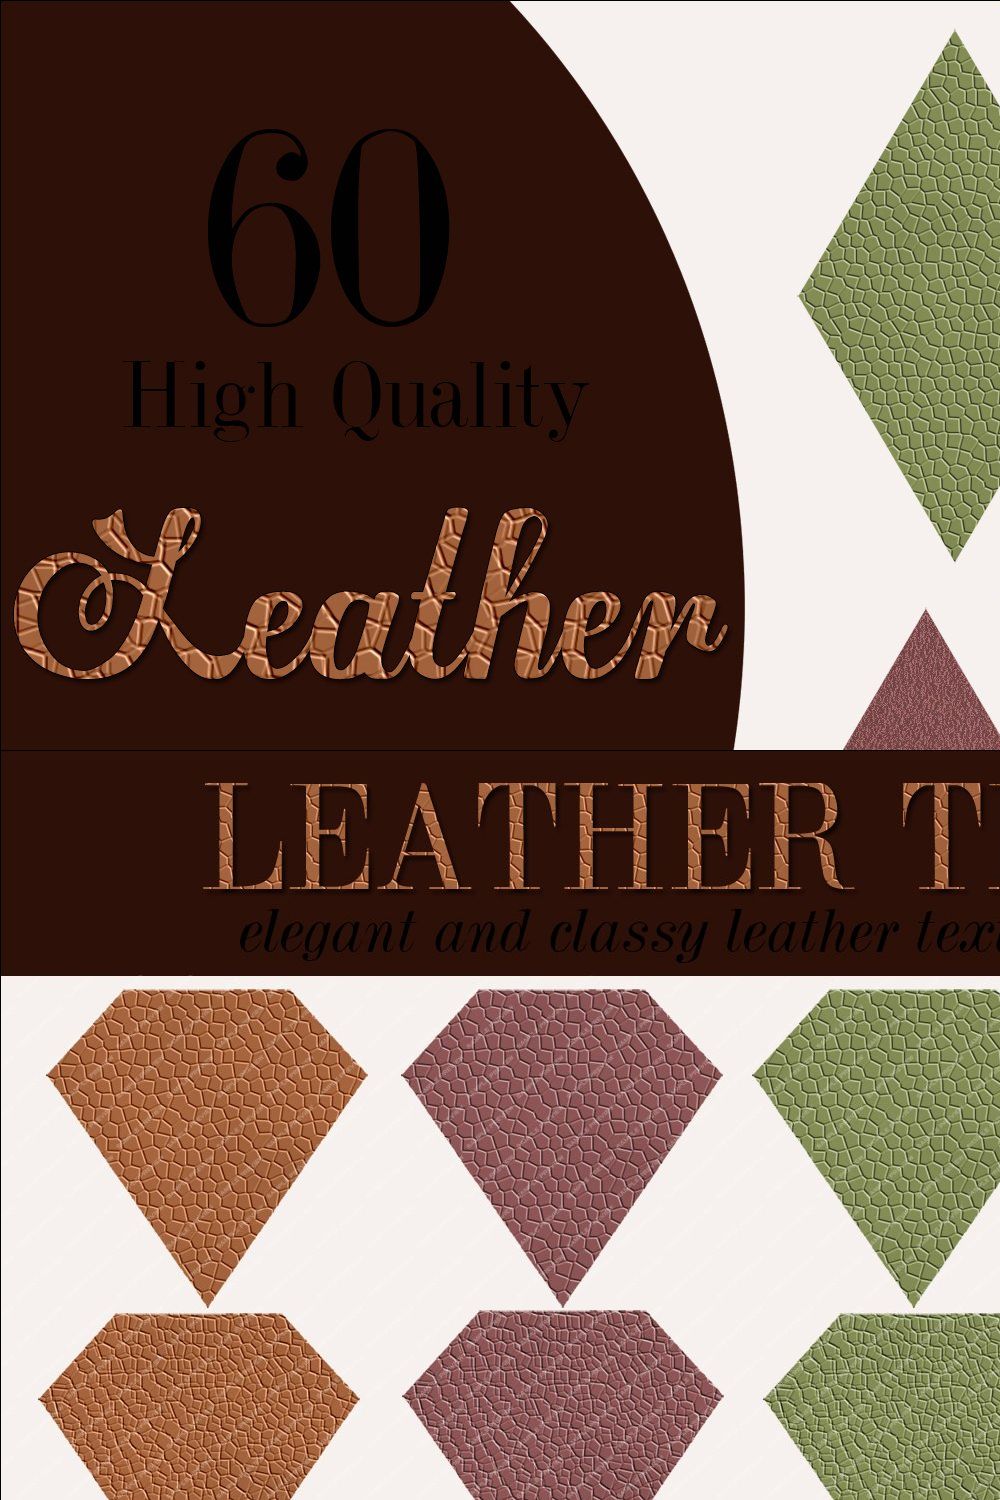 Leather Textures Collection pinterest preview image.